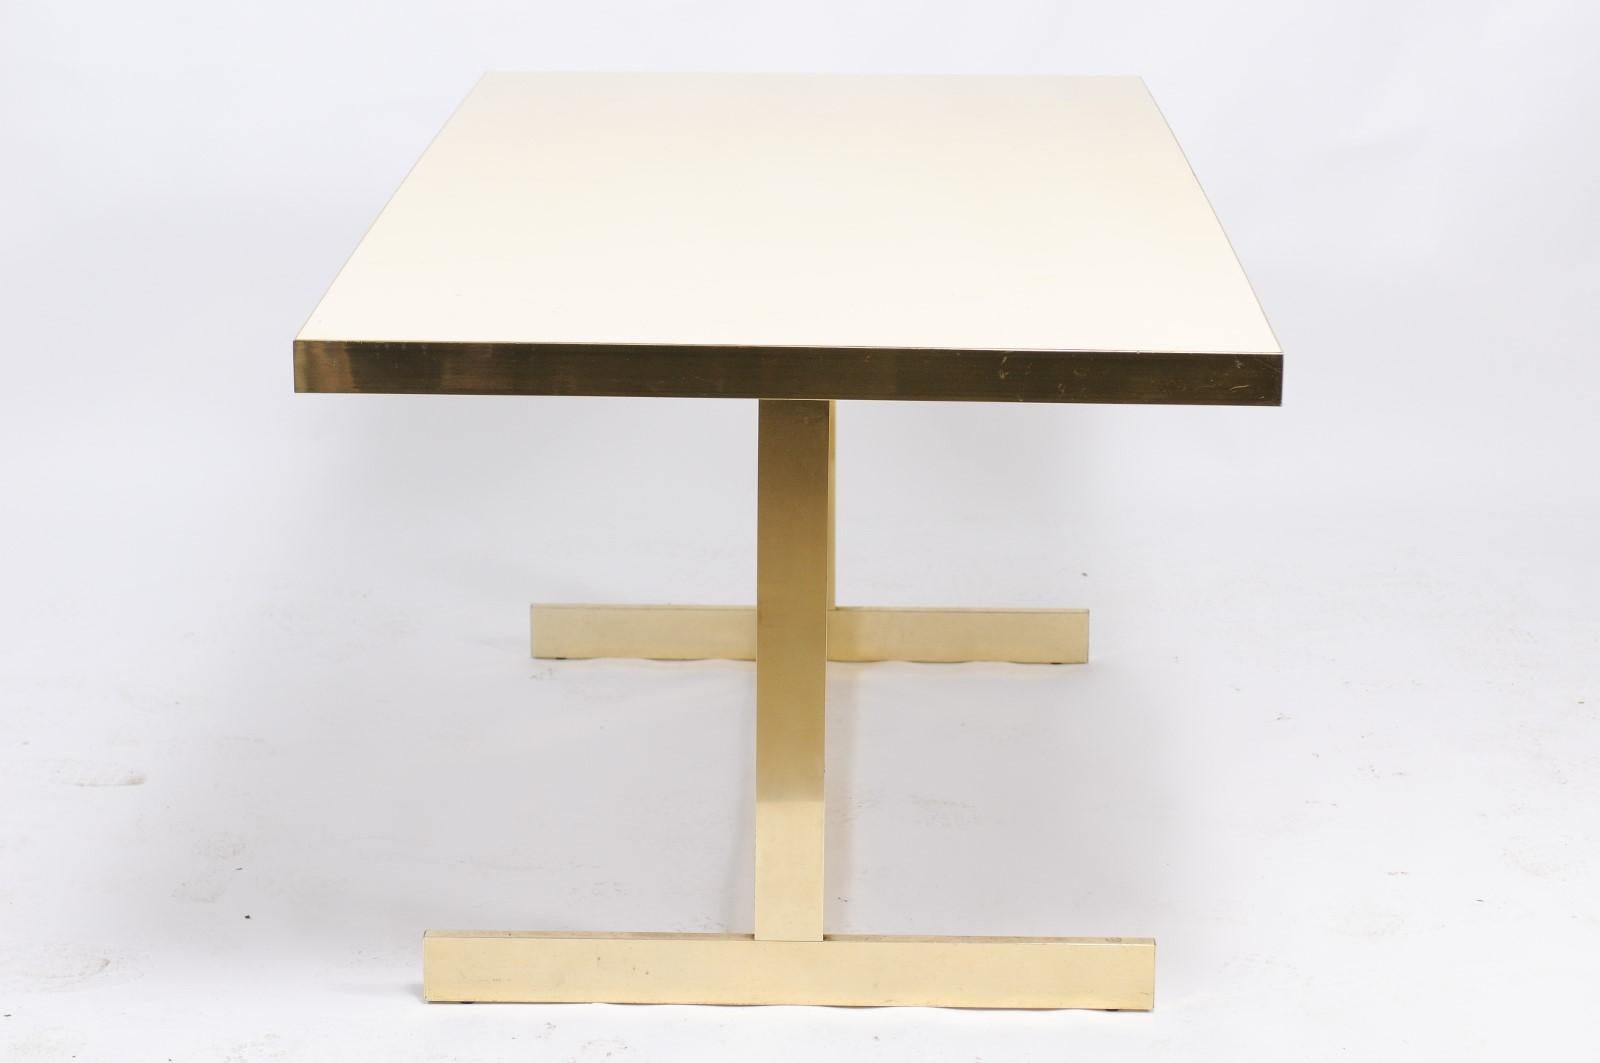 Italian Vintage Mid-Century Modern Formica Dining Table with Brass Trestle Base (Messing)